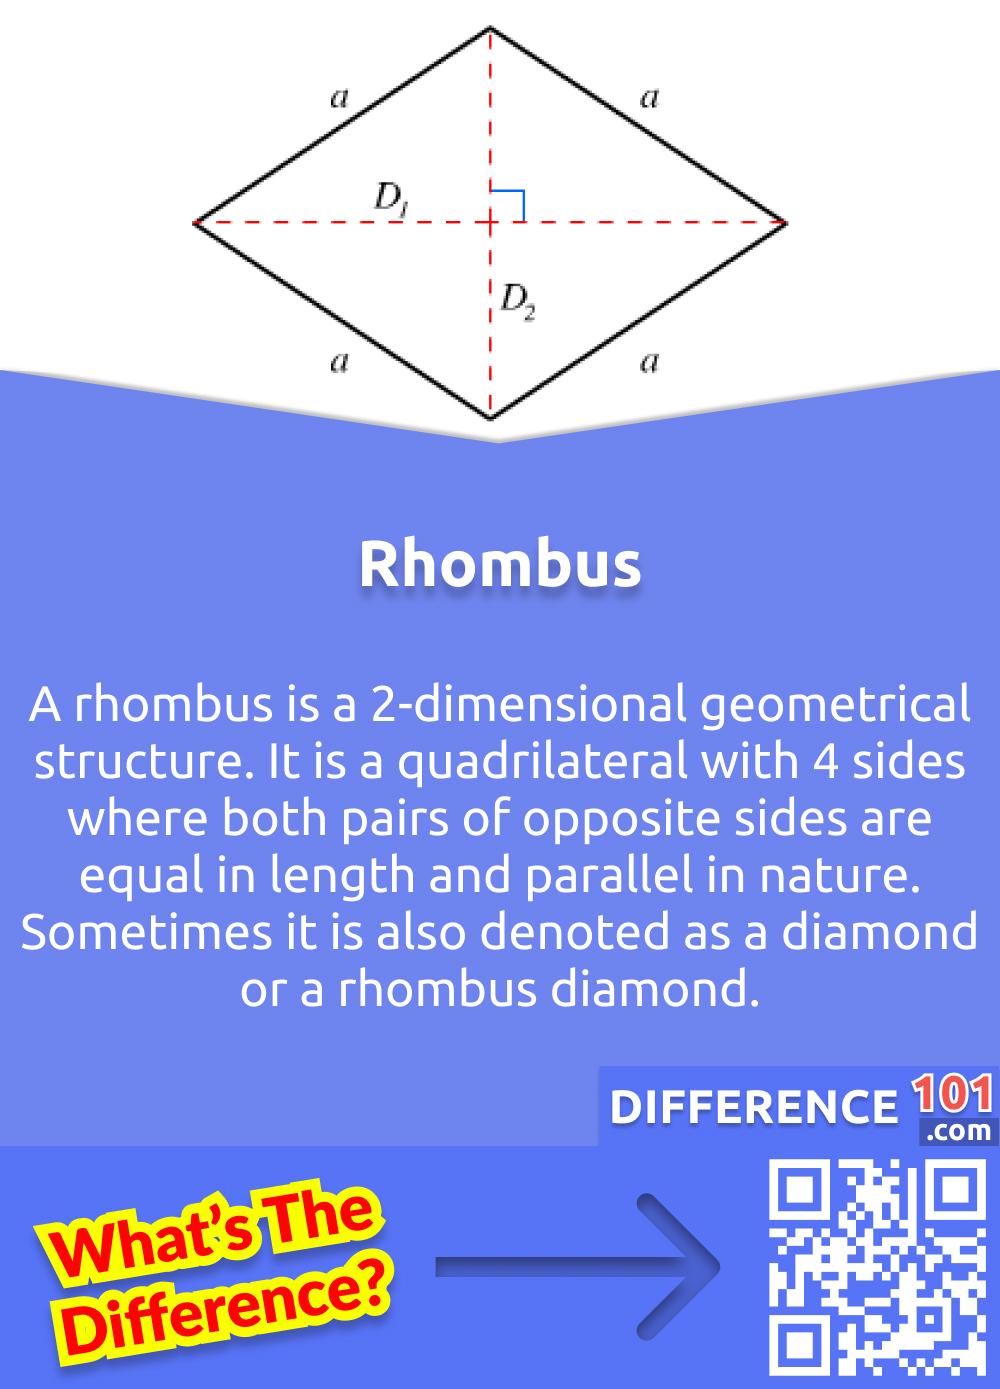 What is Rhombus? A rhombus is a 2-dimensional geometrical structure. It is a quadrilateral with 4 sides where both pairs of opposite sides are equal in length and parallel in nature. Sometimes it is also denoted as a diamond or a rhombus diamond.